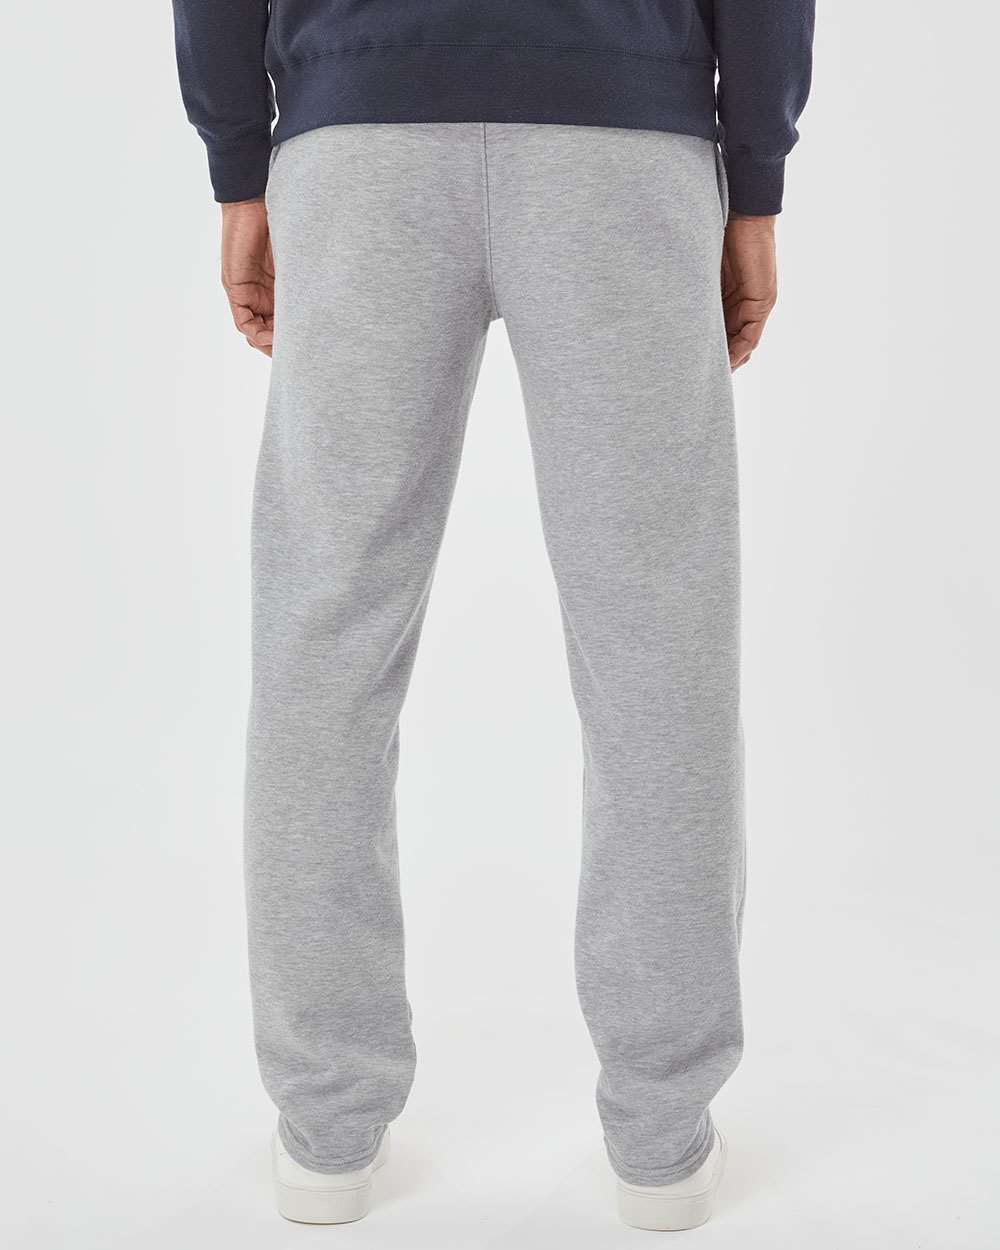  Russell Athletic Mens Big and Tall Open Bottom Lounge Pants -  Jersey Sweatpants Heather Grey : Clothing, Shoes & Jewelry